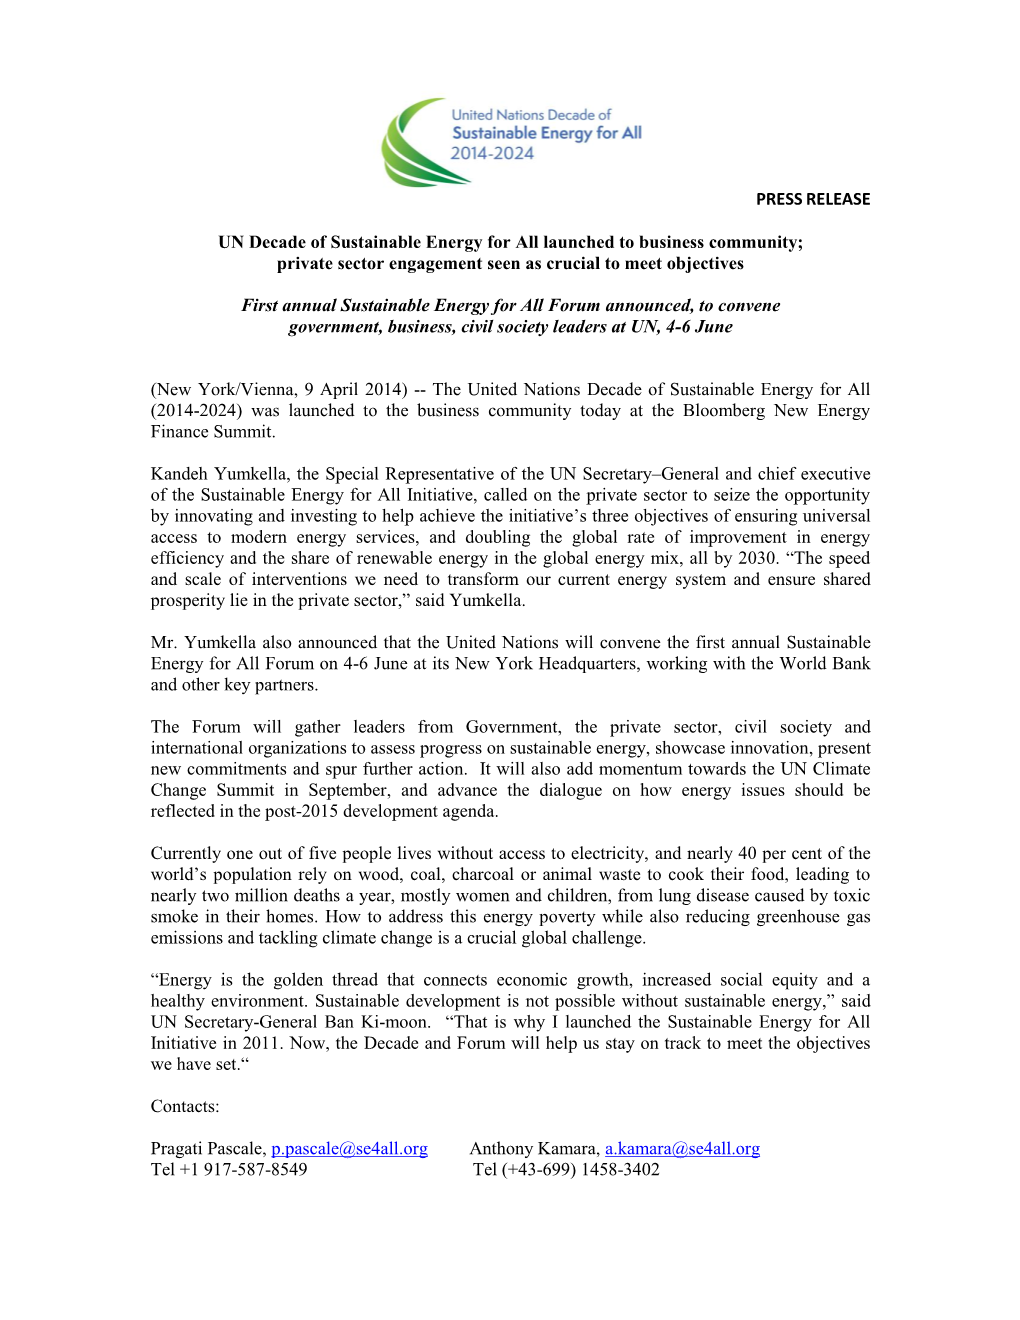 PRESS RELEASE UN Decade of Sustainable Energy for All Launched